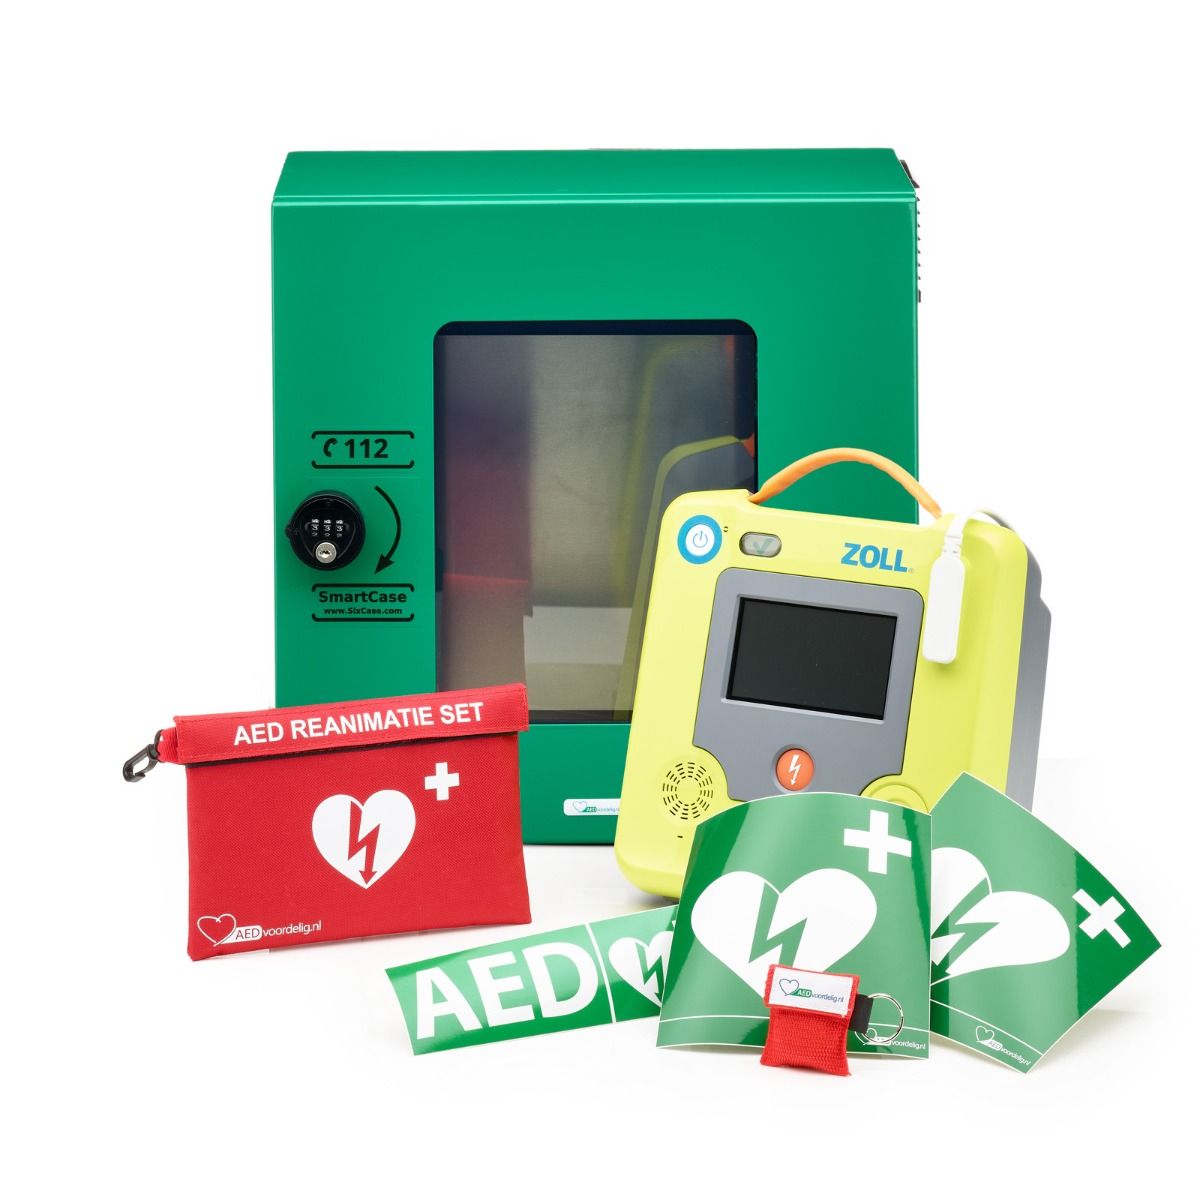 ZOLL AED 3 + Inclusief Buitenkast